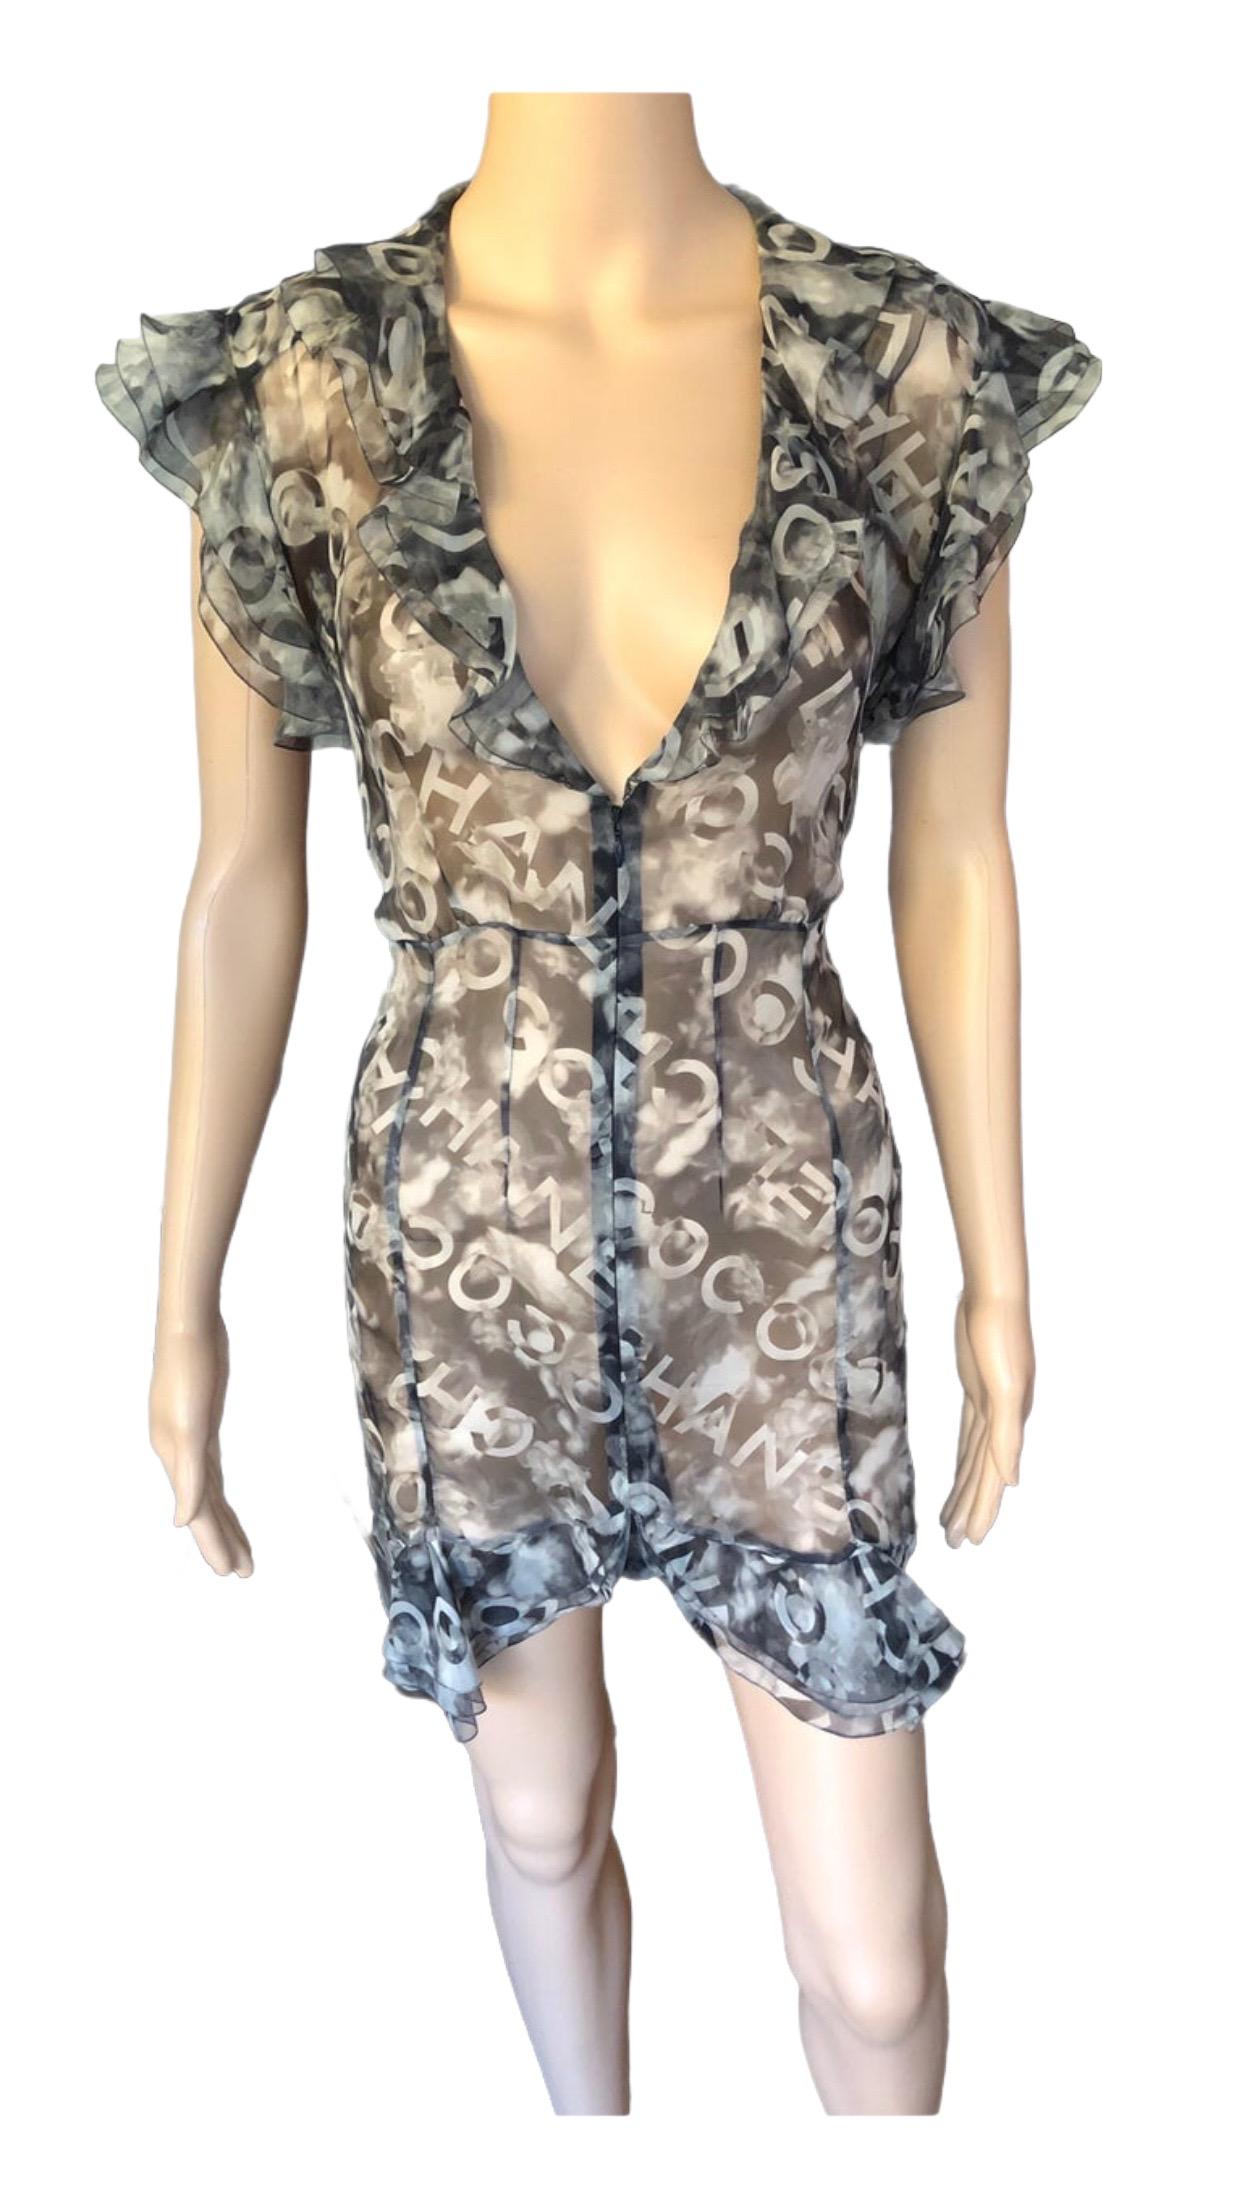 Chanel S/S 2002 Logo Monogram Sheer Plunging Silk Tunic Dress For Sale 2